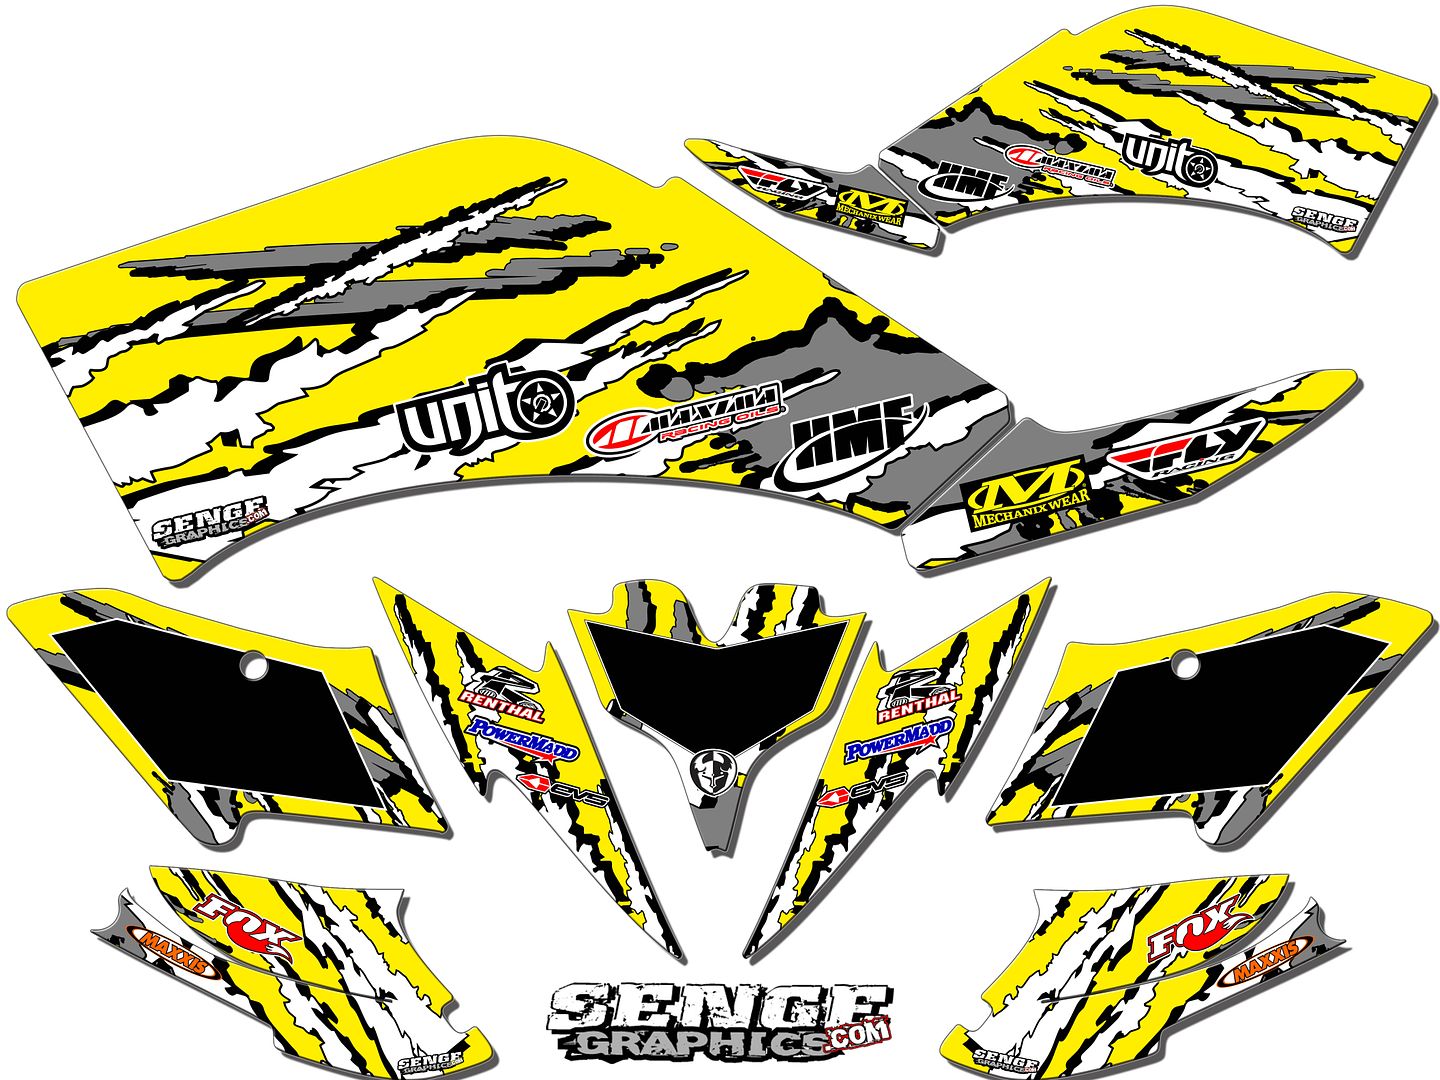 CAN-AM CAN AM DS450 DS 450 GRAPHICS KIT ATV STICKERS DECALS DECO 4 FOUR WHEELER